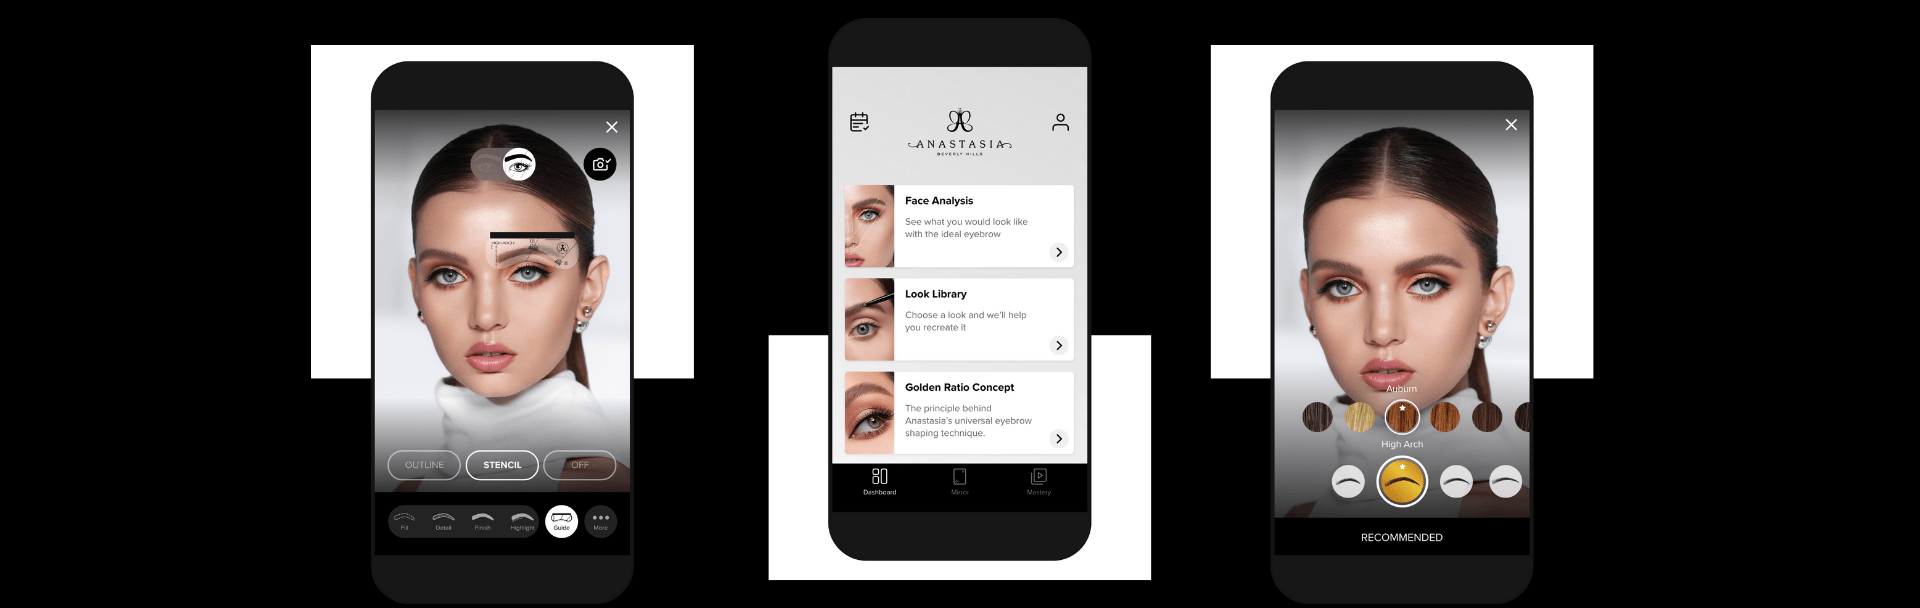 QUALITANCE collaboratively develops the first mobile application for iconic beauty brand Anastasia Beverly Hills